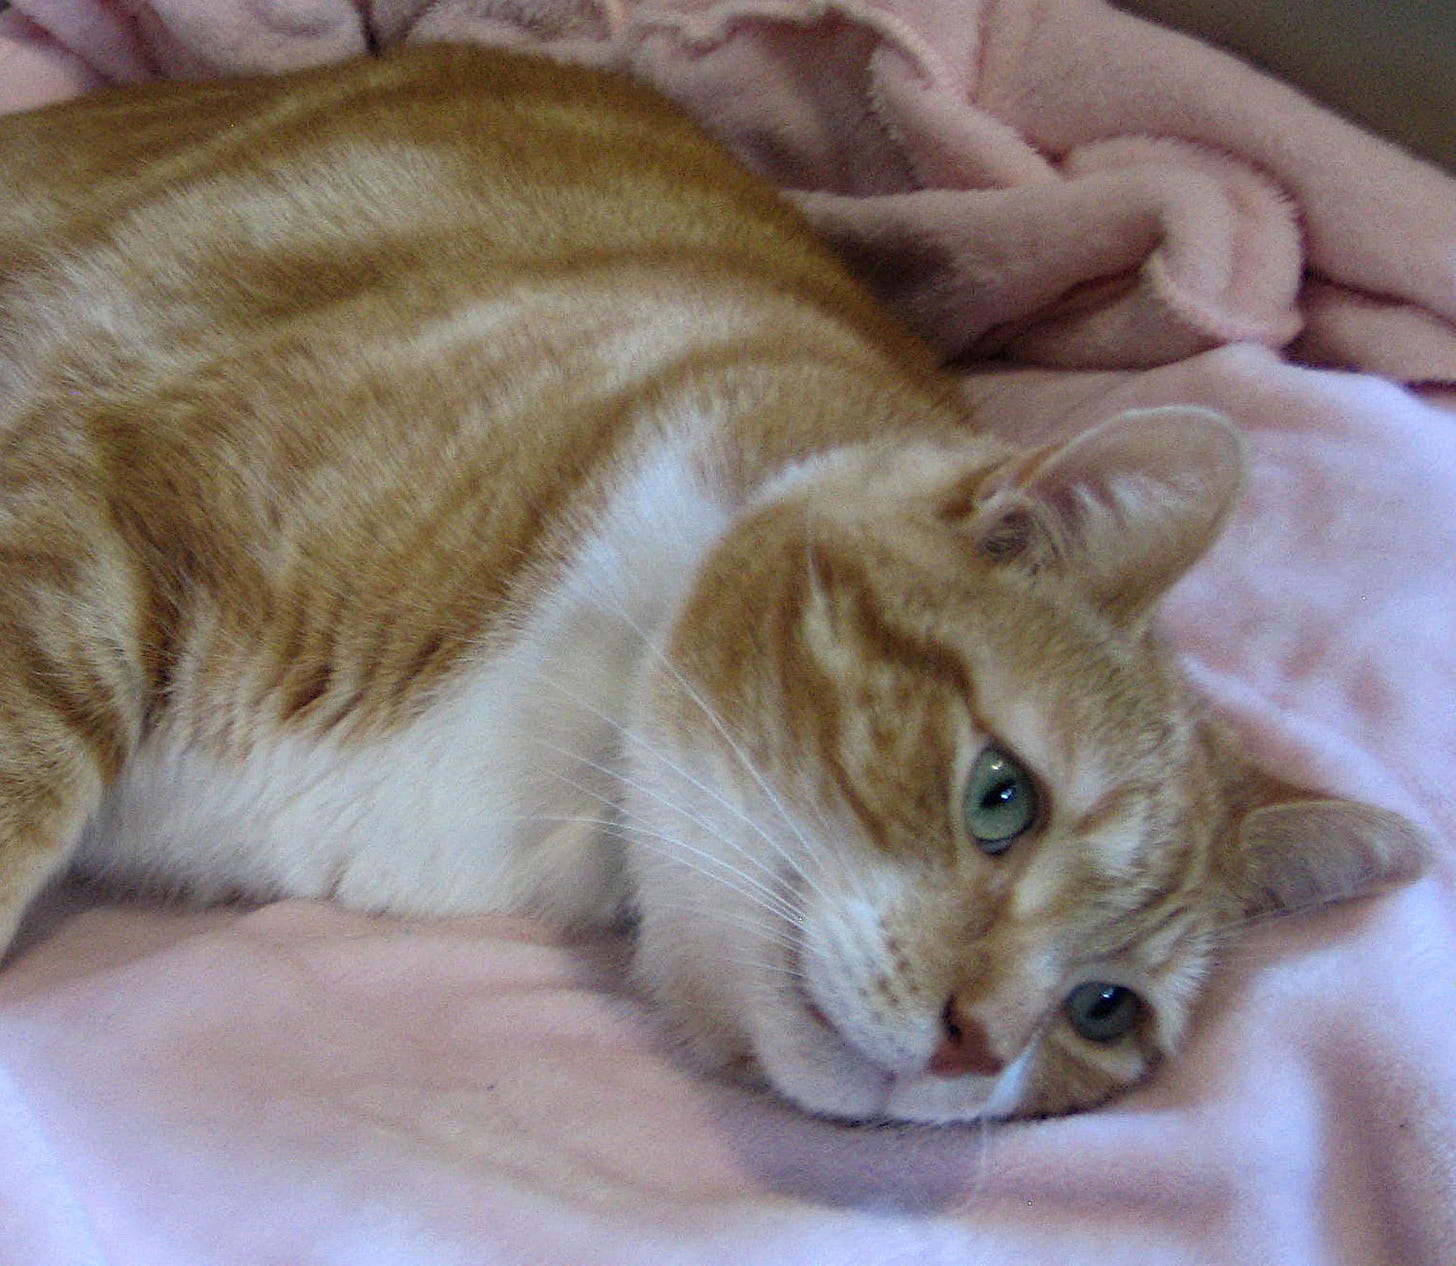 A fine orange cat with a white chest and chin and grape green eyes lying on a fluffy pink blanket